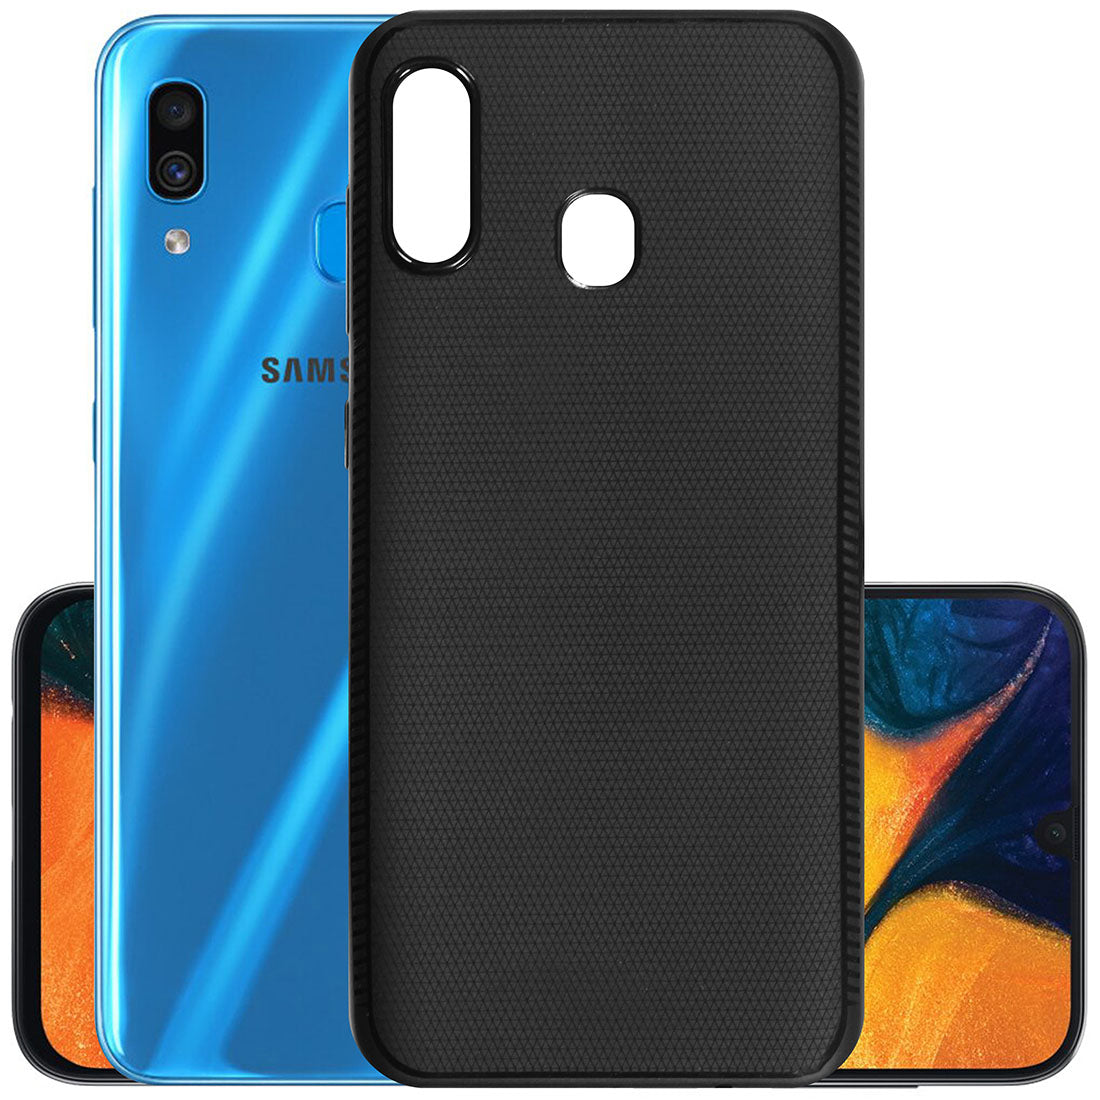 Comfort Grip Back Case Cover for Samsung Galaxy A30